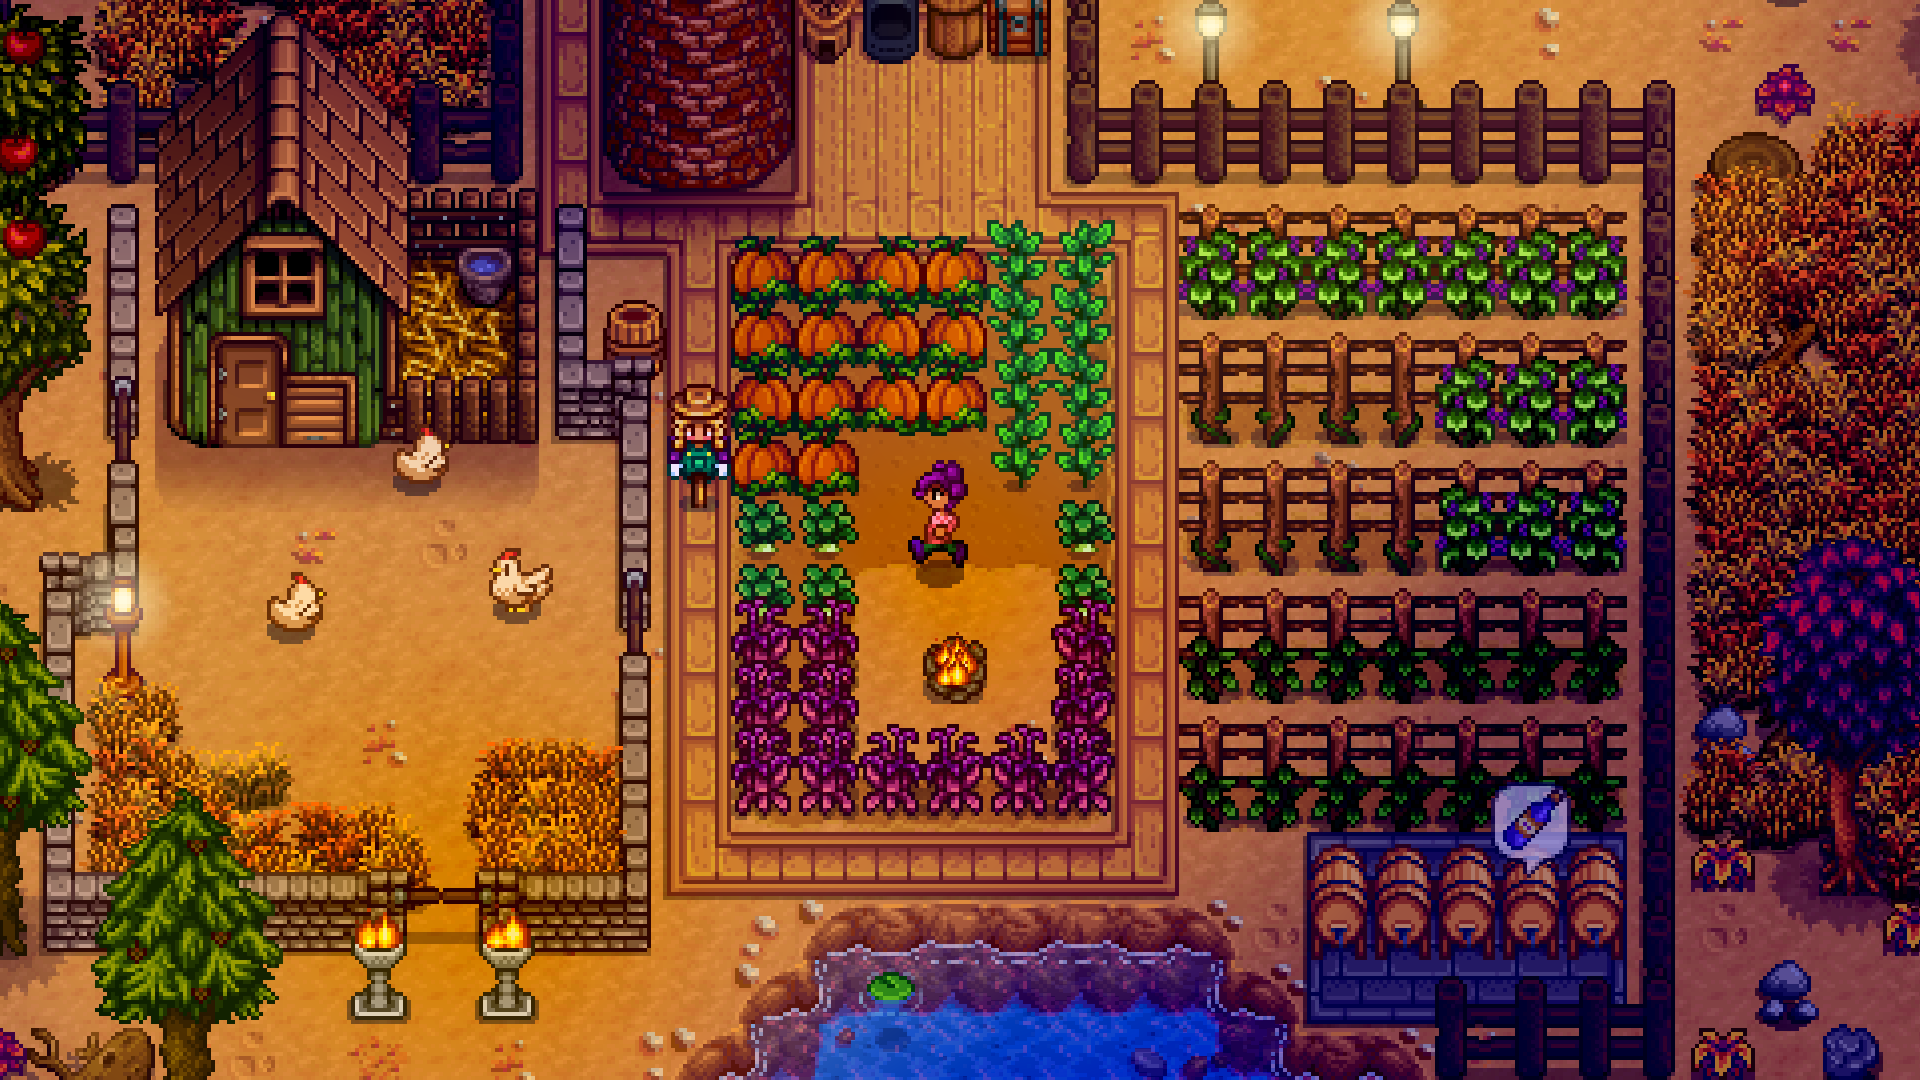 Stardew Valley Mayor Lewis helps sell the player's goods -- but does the money go towards the Stardew Valley Mayor Lewis statue instead?